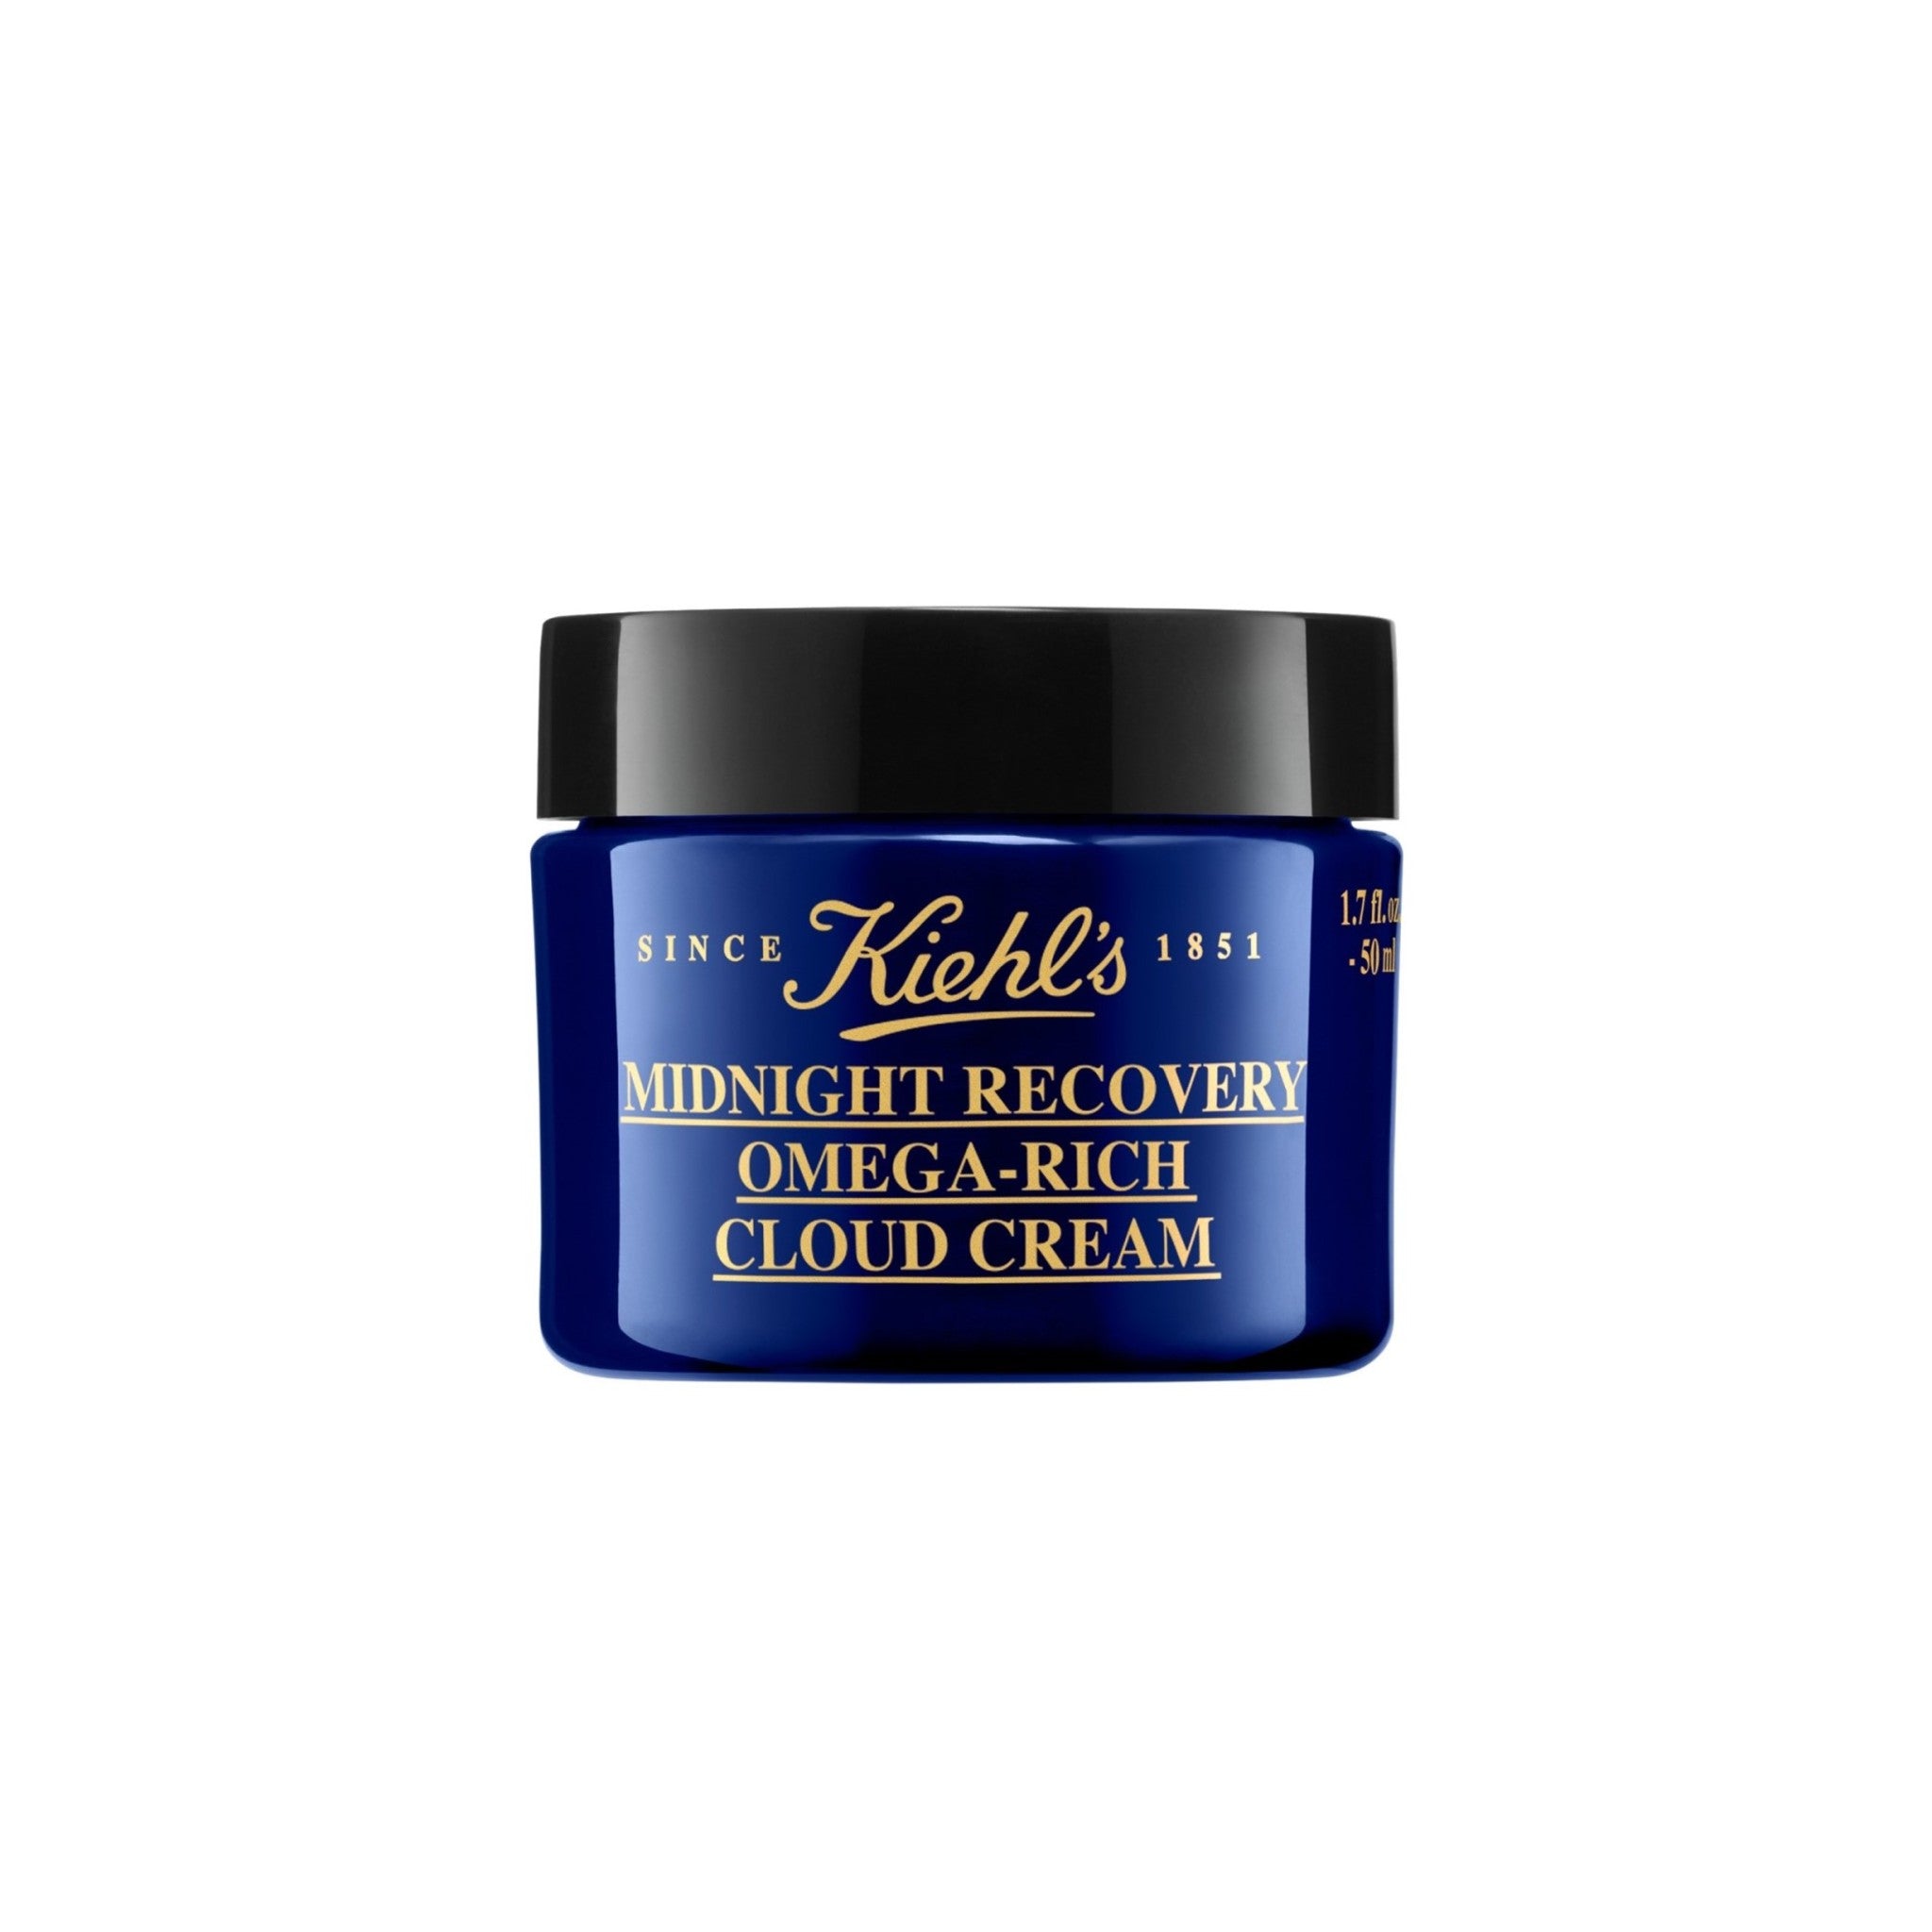 Midnight Recovery Omega-Rich Cloud Cream main image.